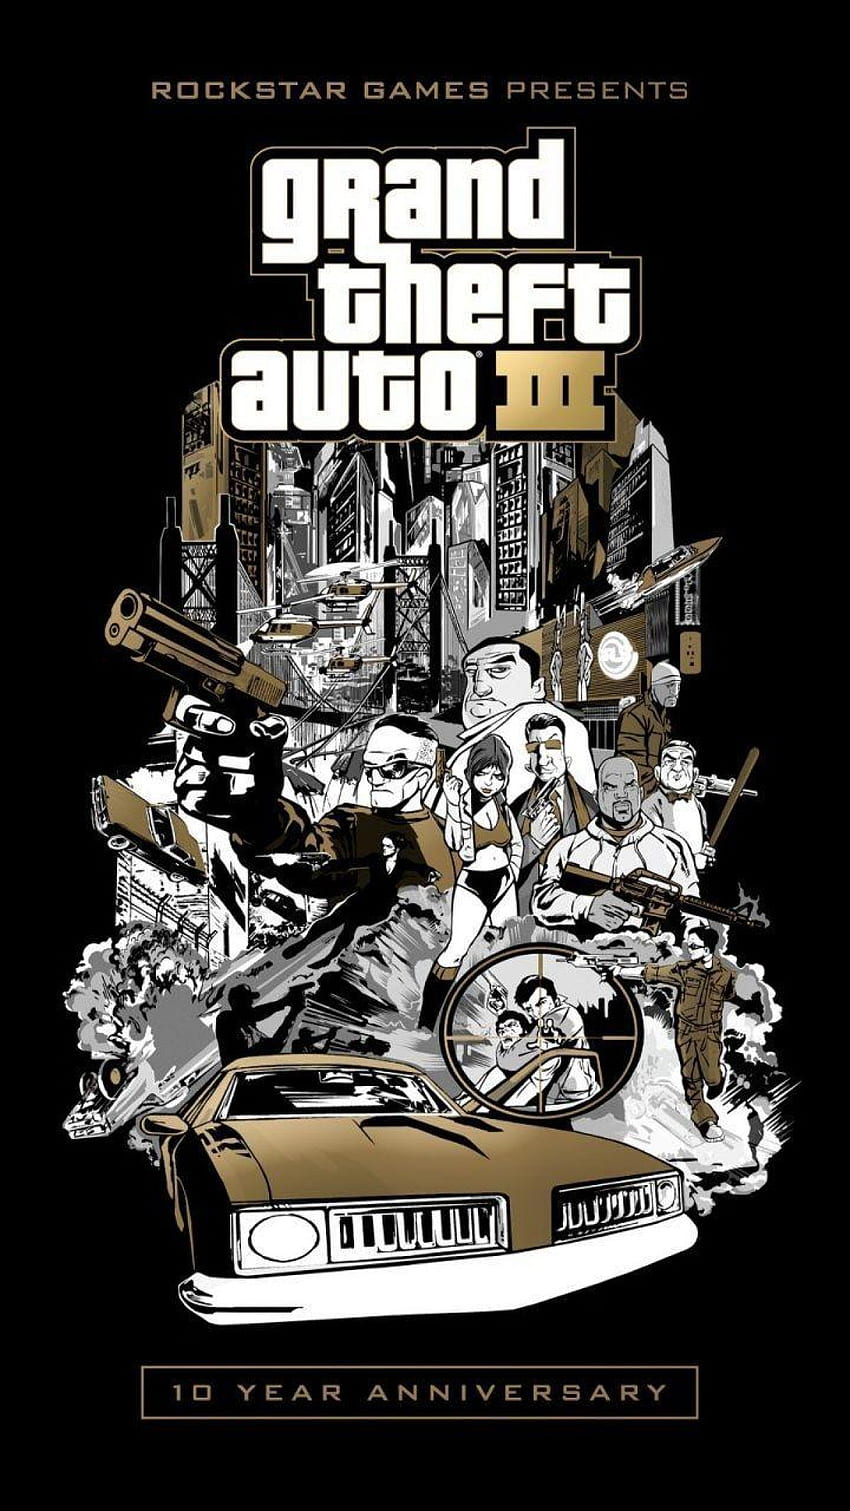 Download Grand Theft Auto III (MOD, Unlimited Money) 1.9 APK for android